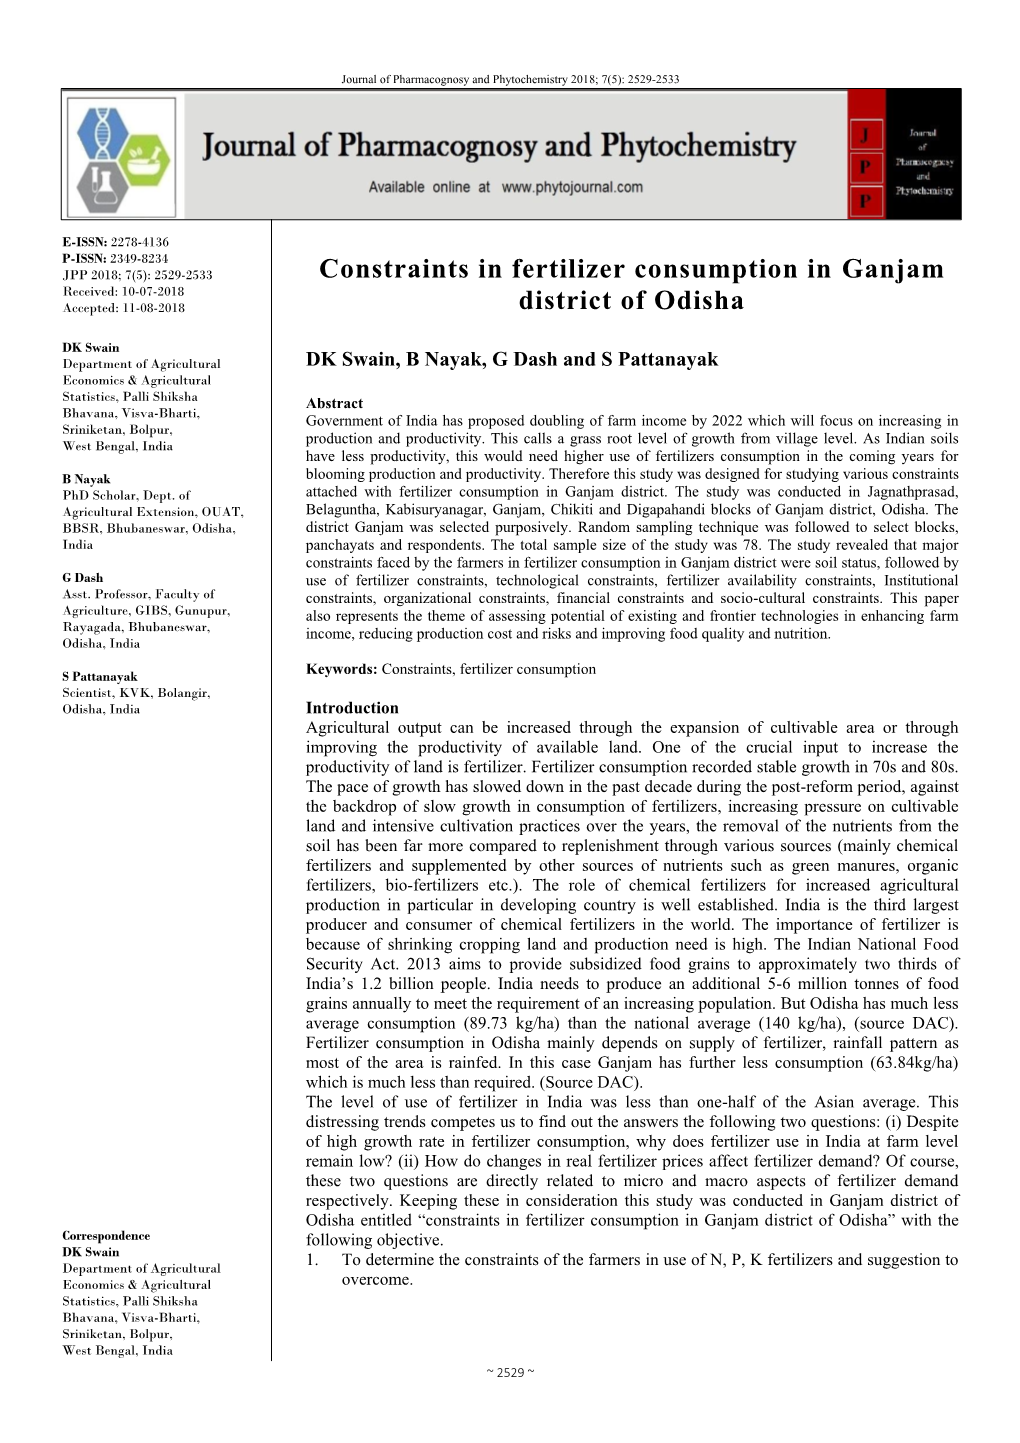 Constraints in Fertilizer Consumption in Ganjam District of Odisha” with the Correspondence Following Objective